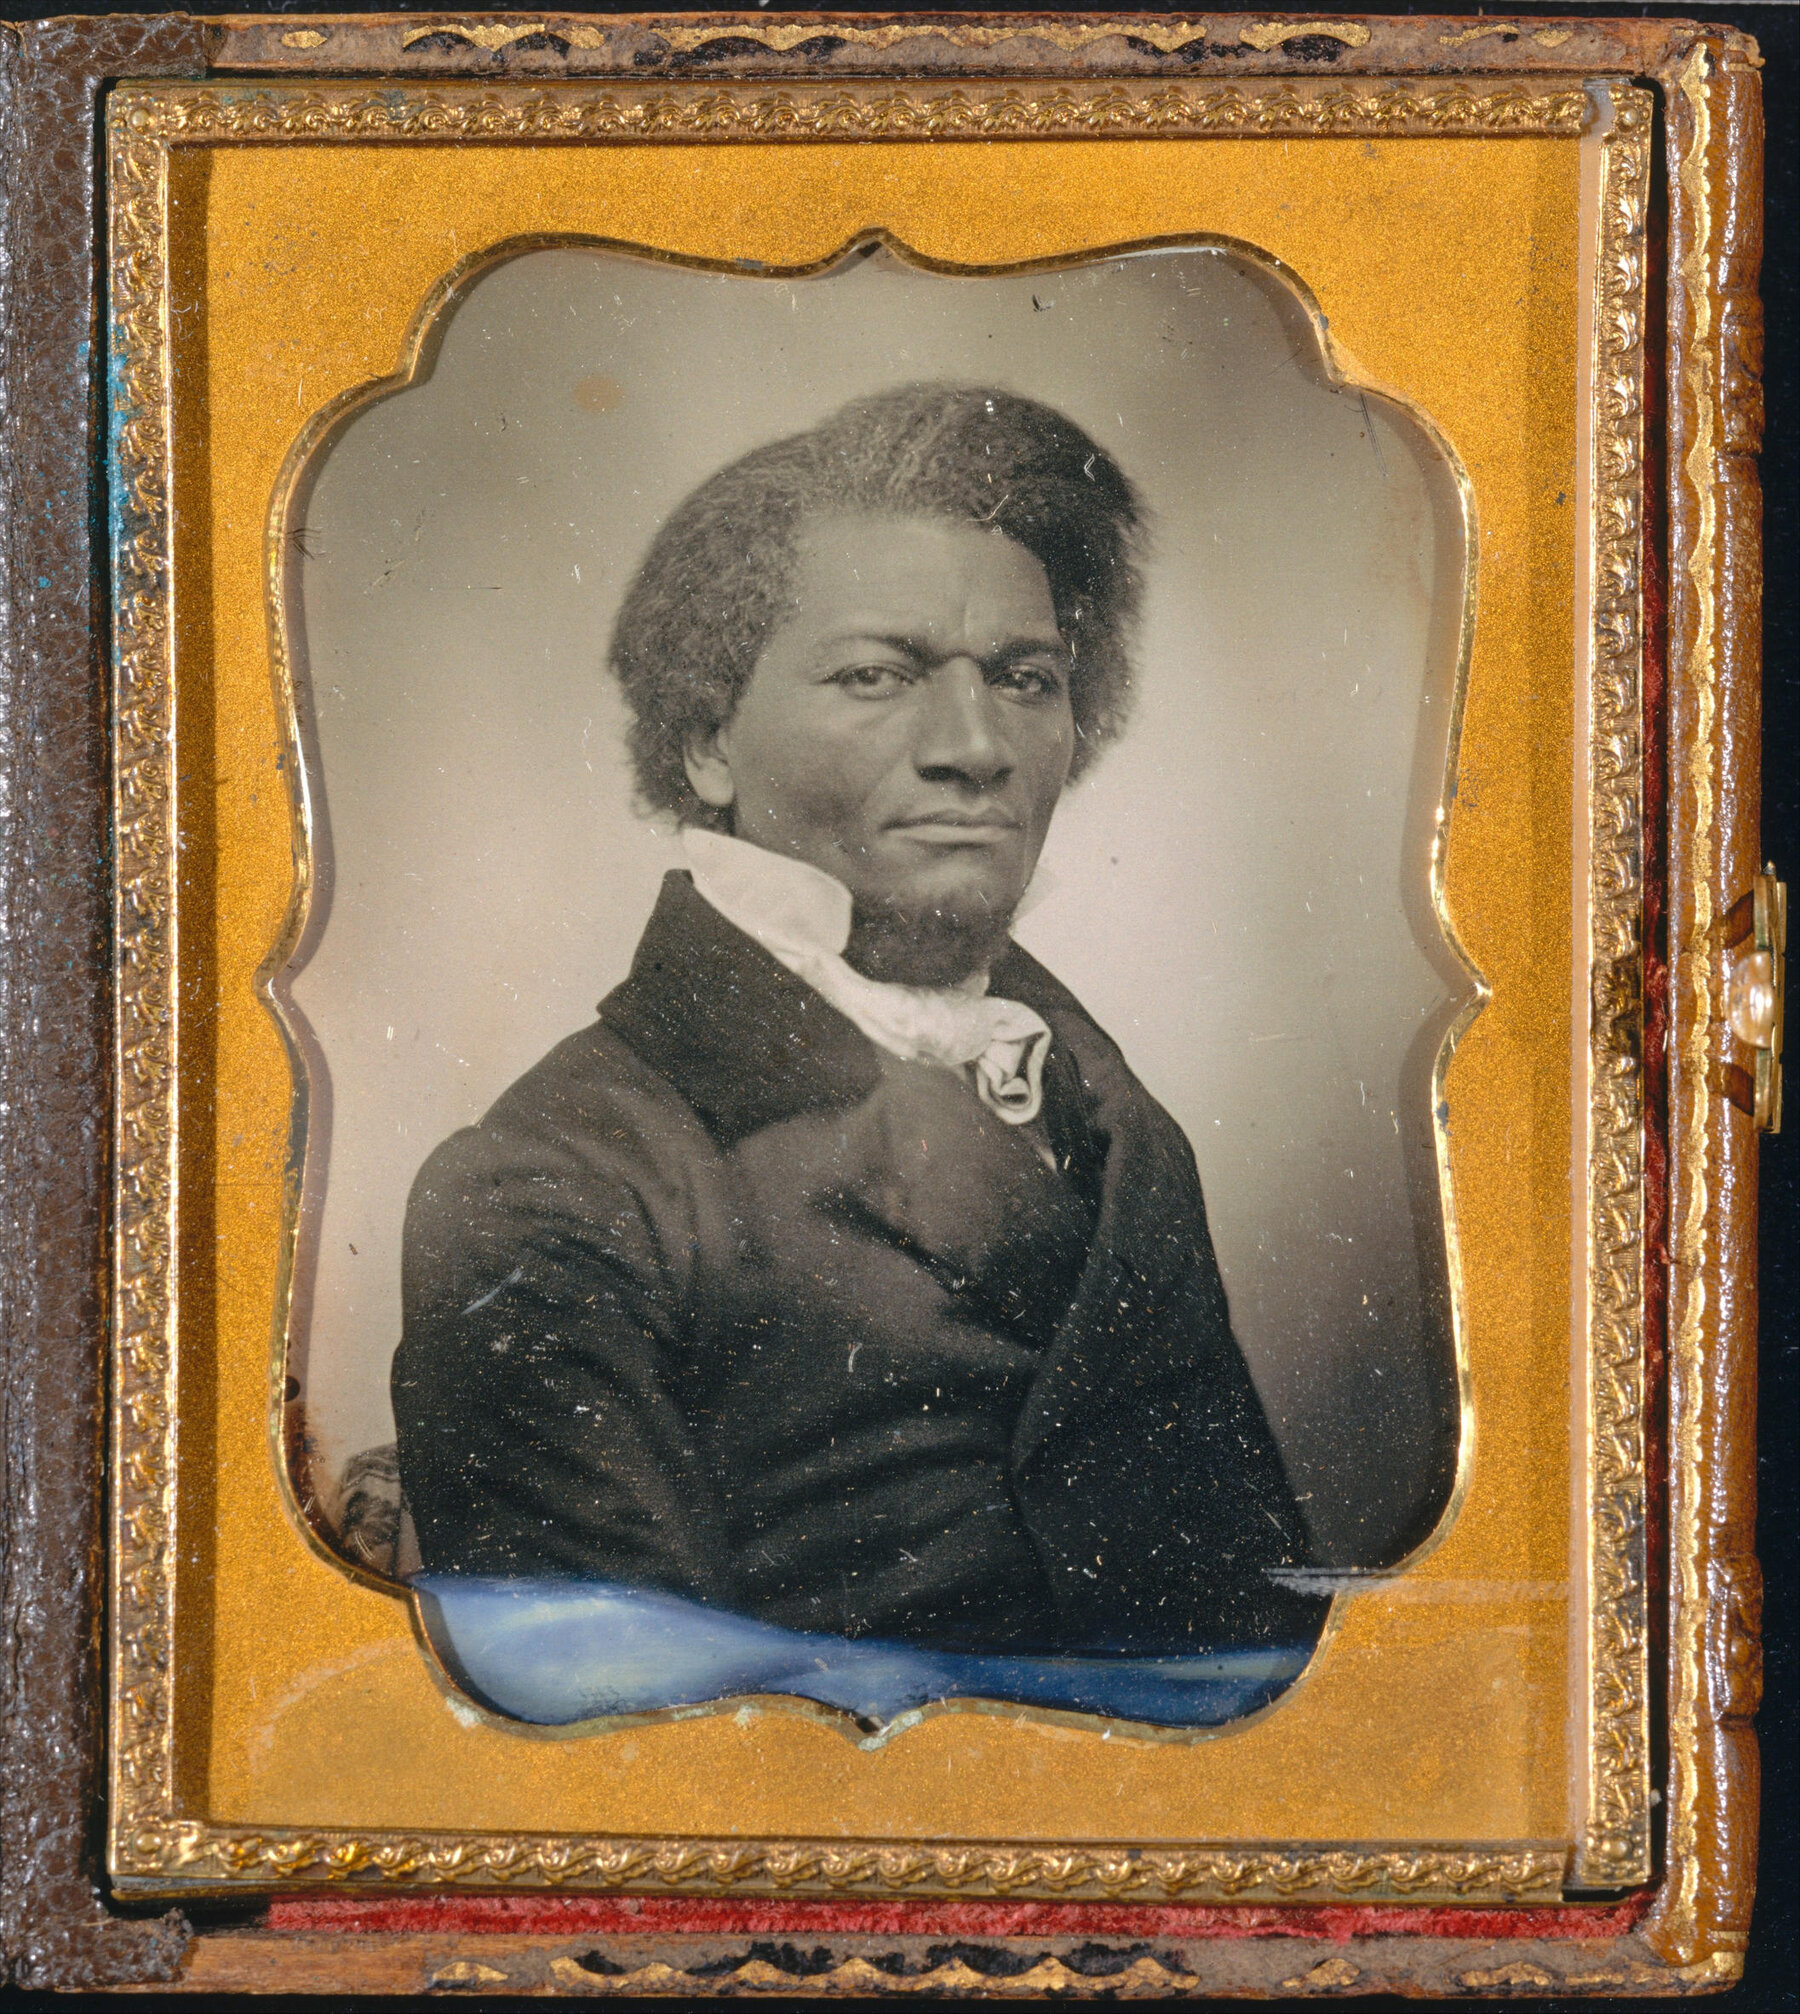 Frederick Douglass posing for a seated portrait, in mid-19th century attire. The portrait is black-and-white and encased in a gold frame.